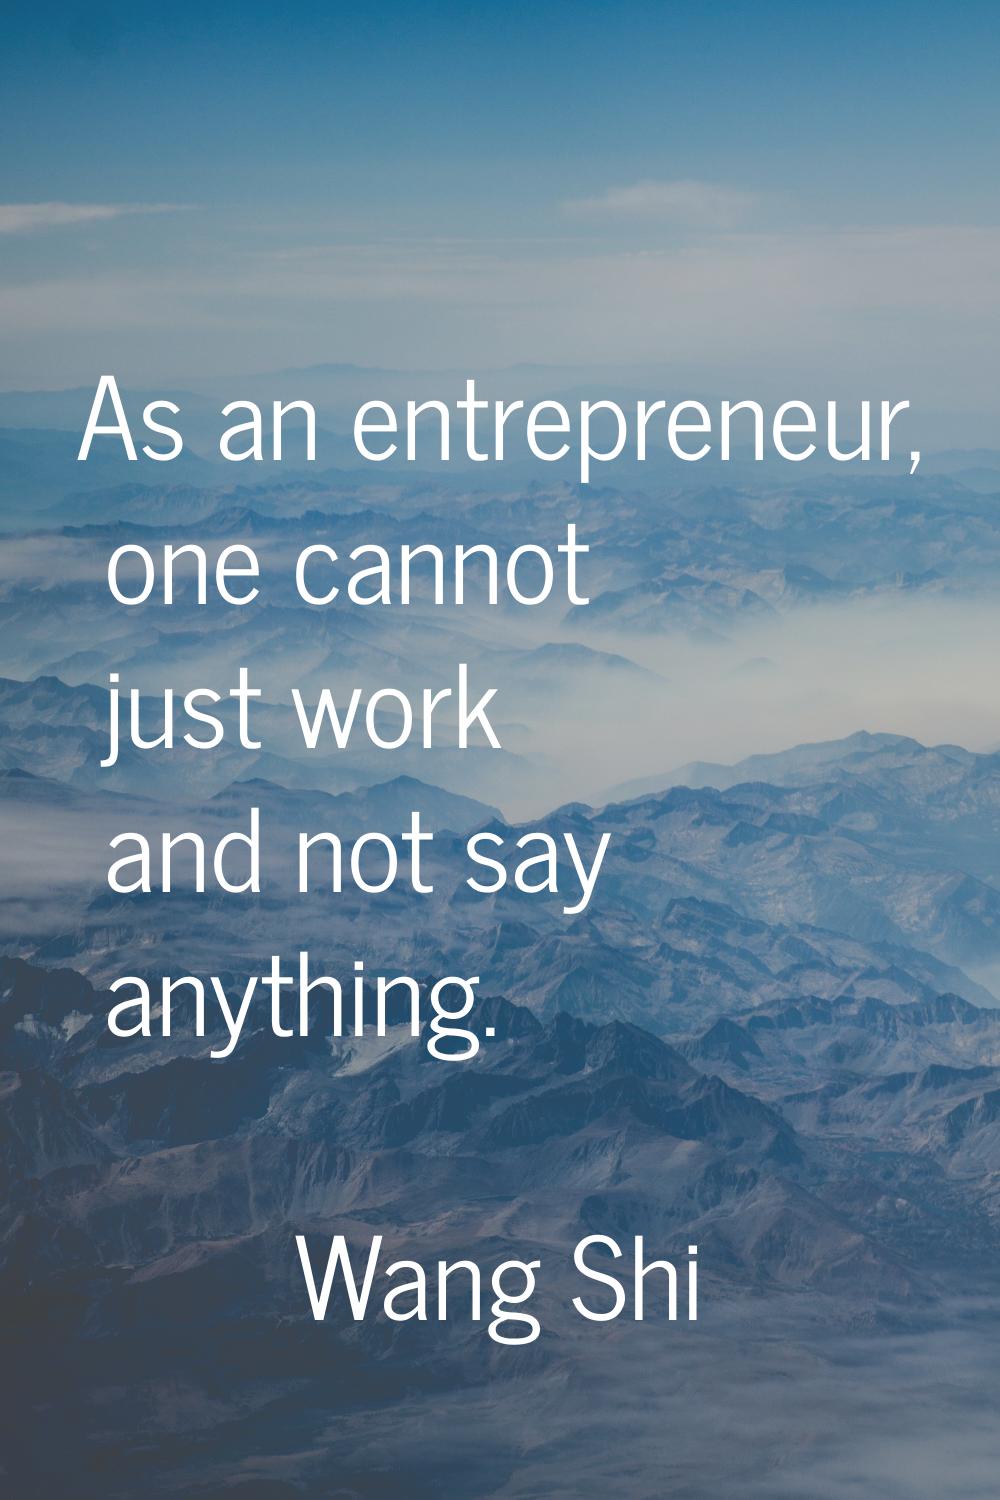 As an entrepreneur, one cannot just work and not say anything.